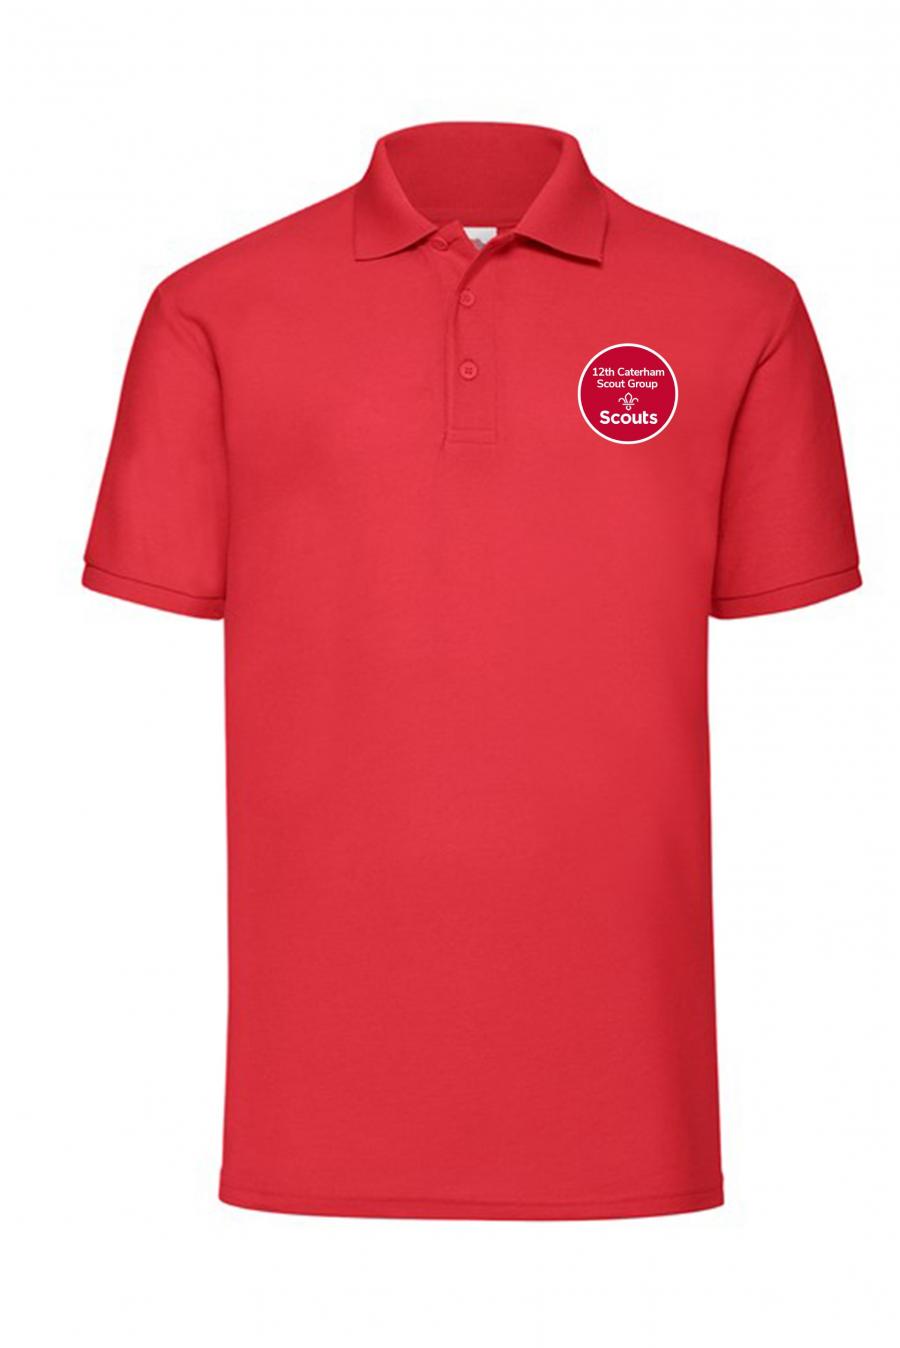 12th Caterham Scouts - Adults Polo Shirt